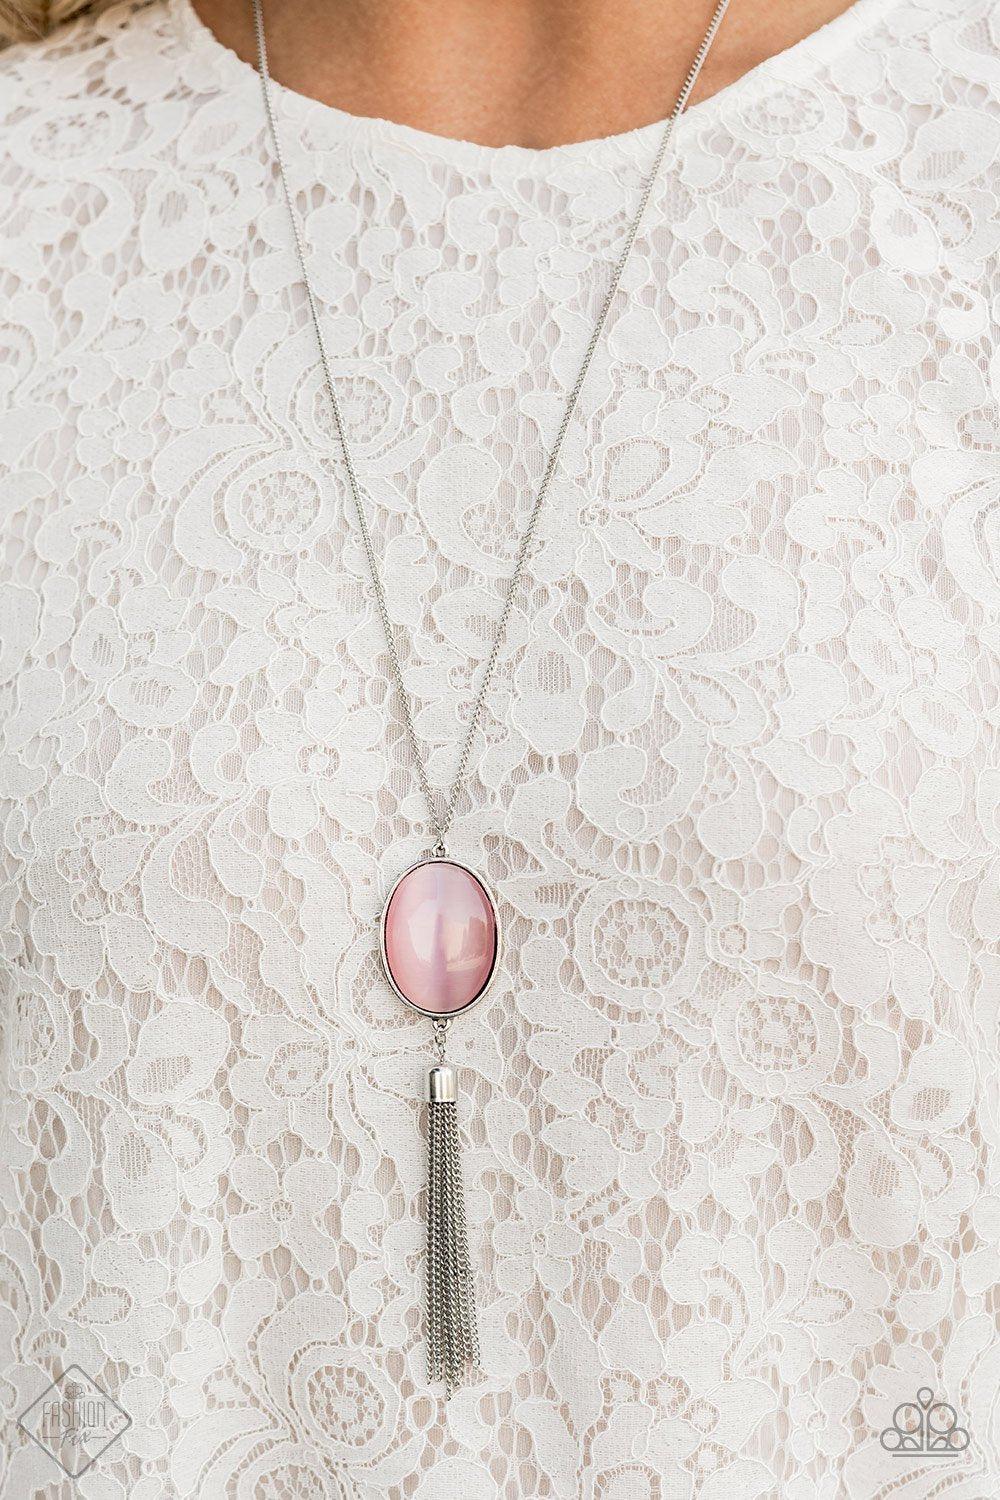 Tasseled Tranquility Pink Moonstone Necklace - Paparazzi Accessories-CarasShop.com - $5 Jewelry by Cara Jewels